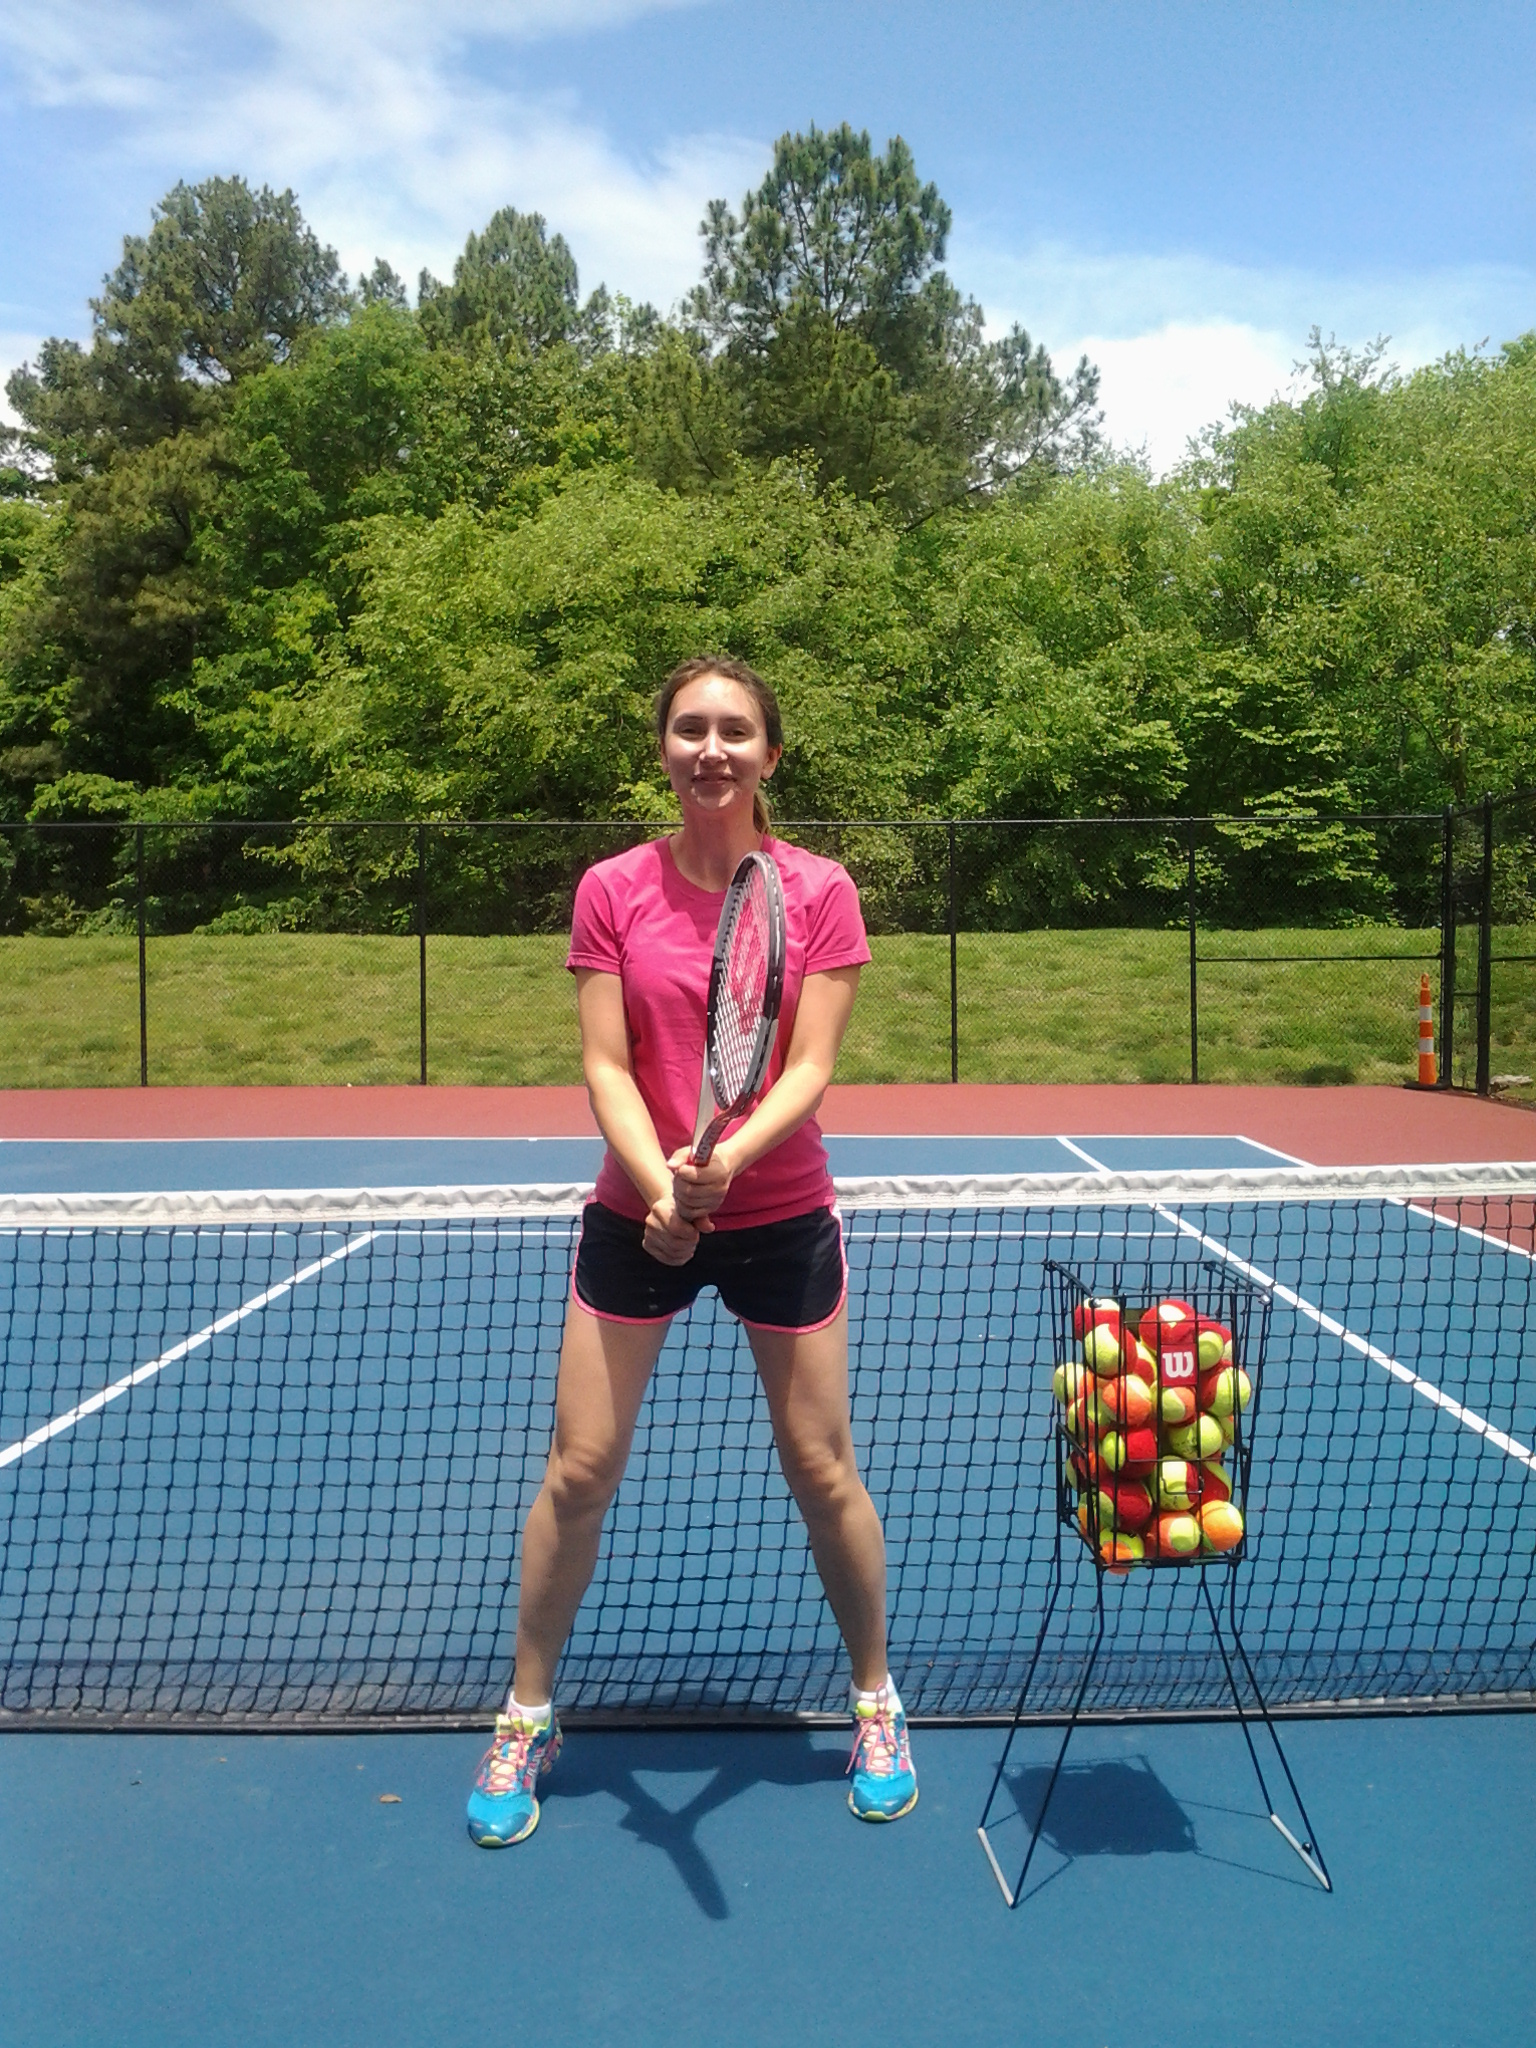 Polina C. teaches tennis lessons in Cary, NC